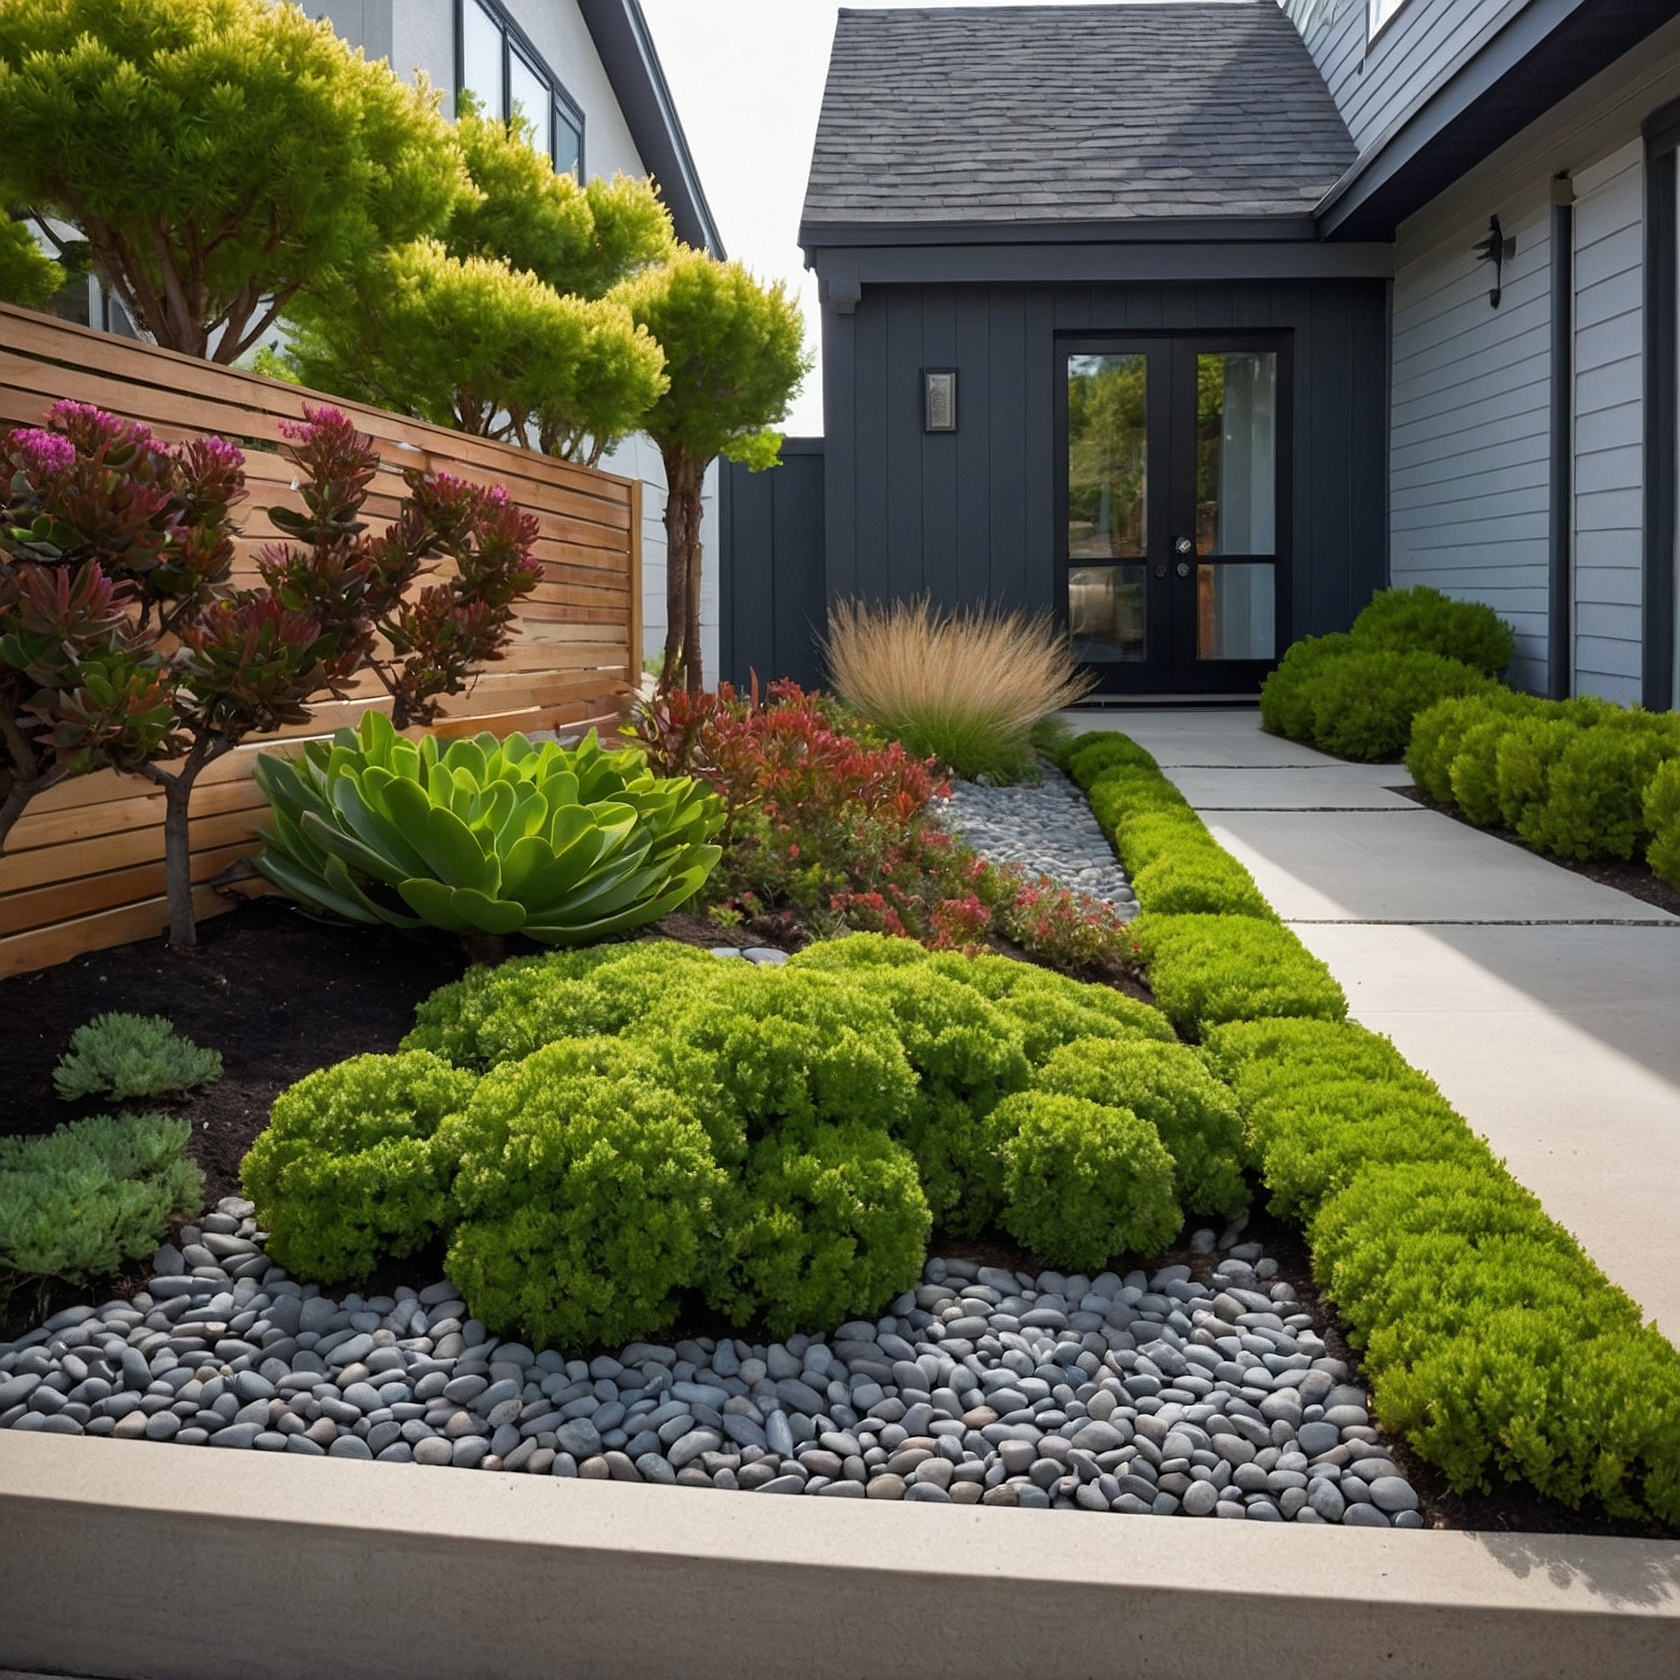 Contemporary Garden With Concrete Pathway And Pebble Flower Bed with Shrubs